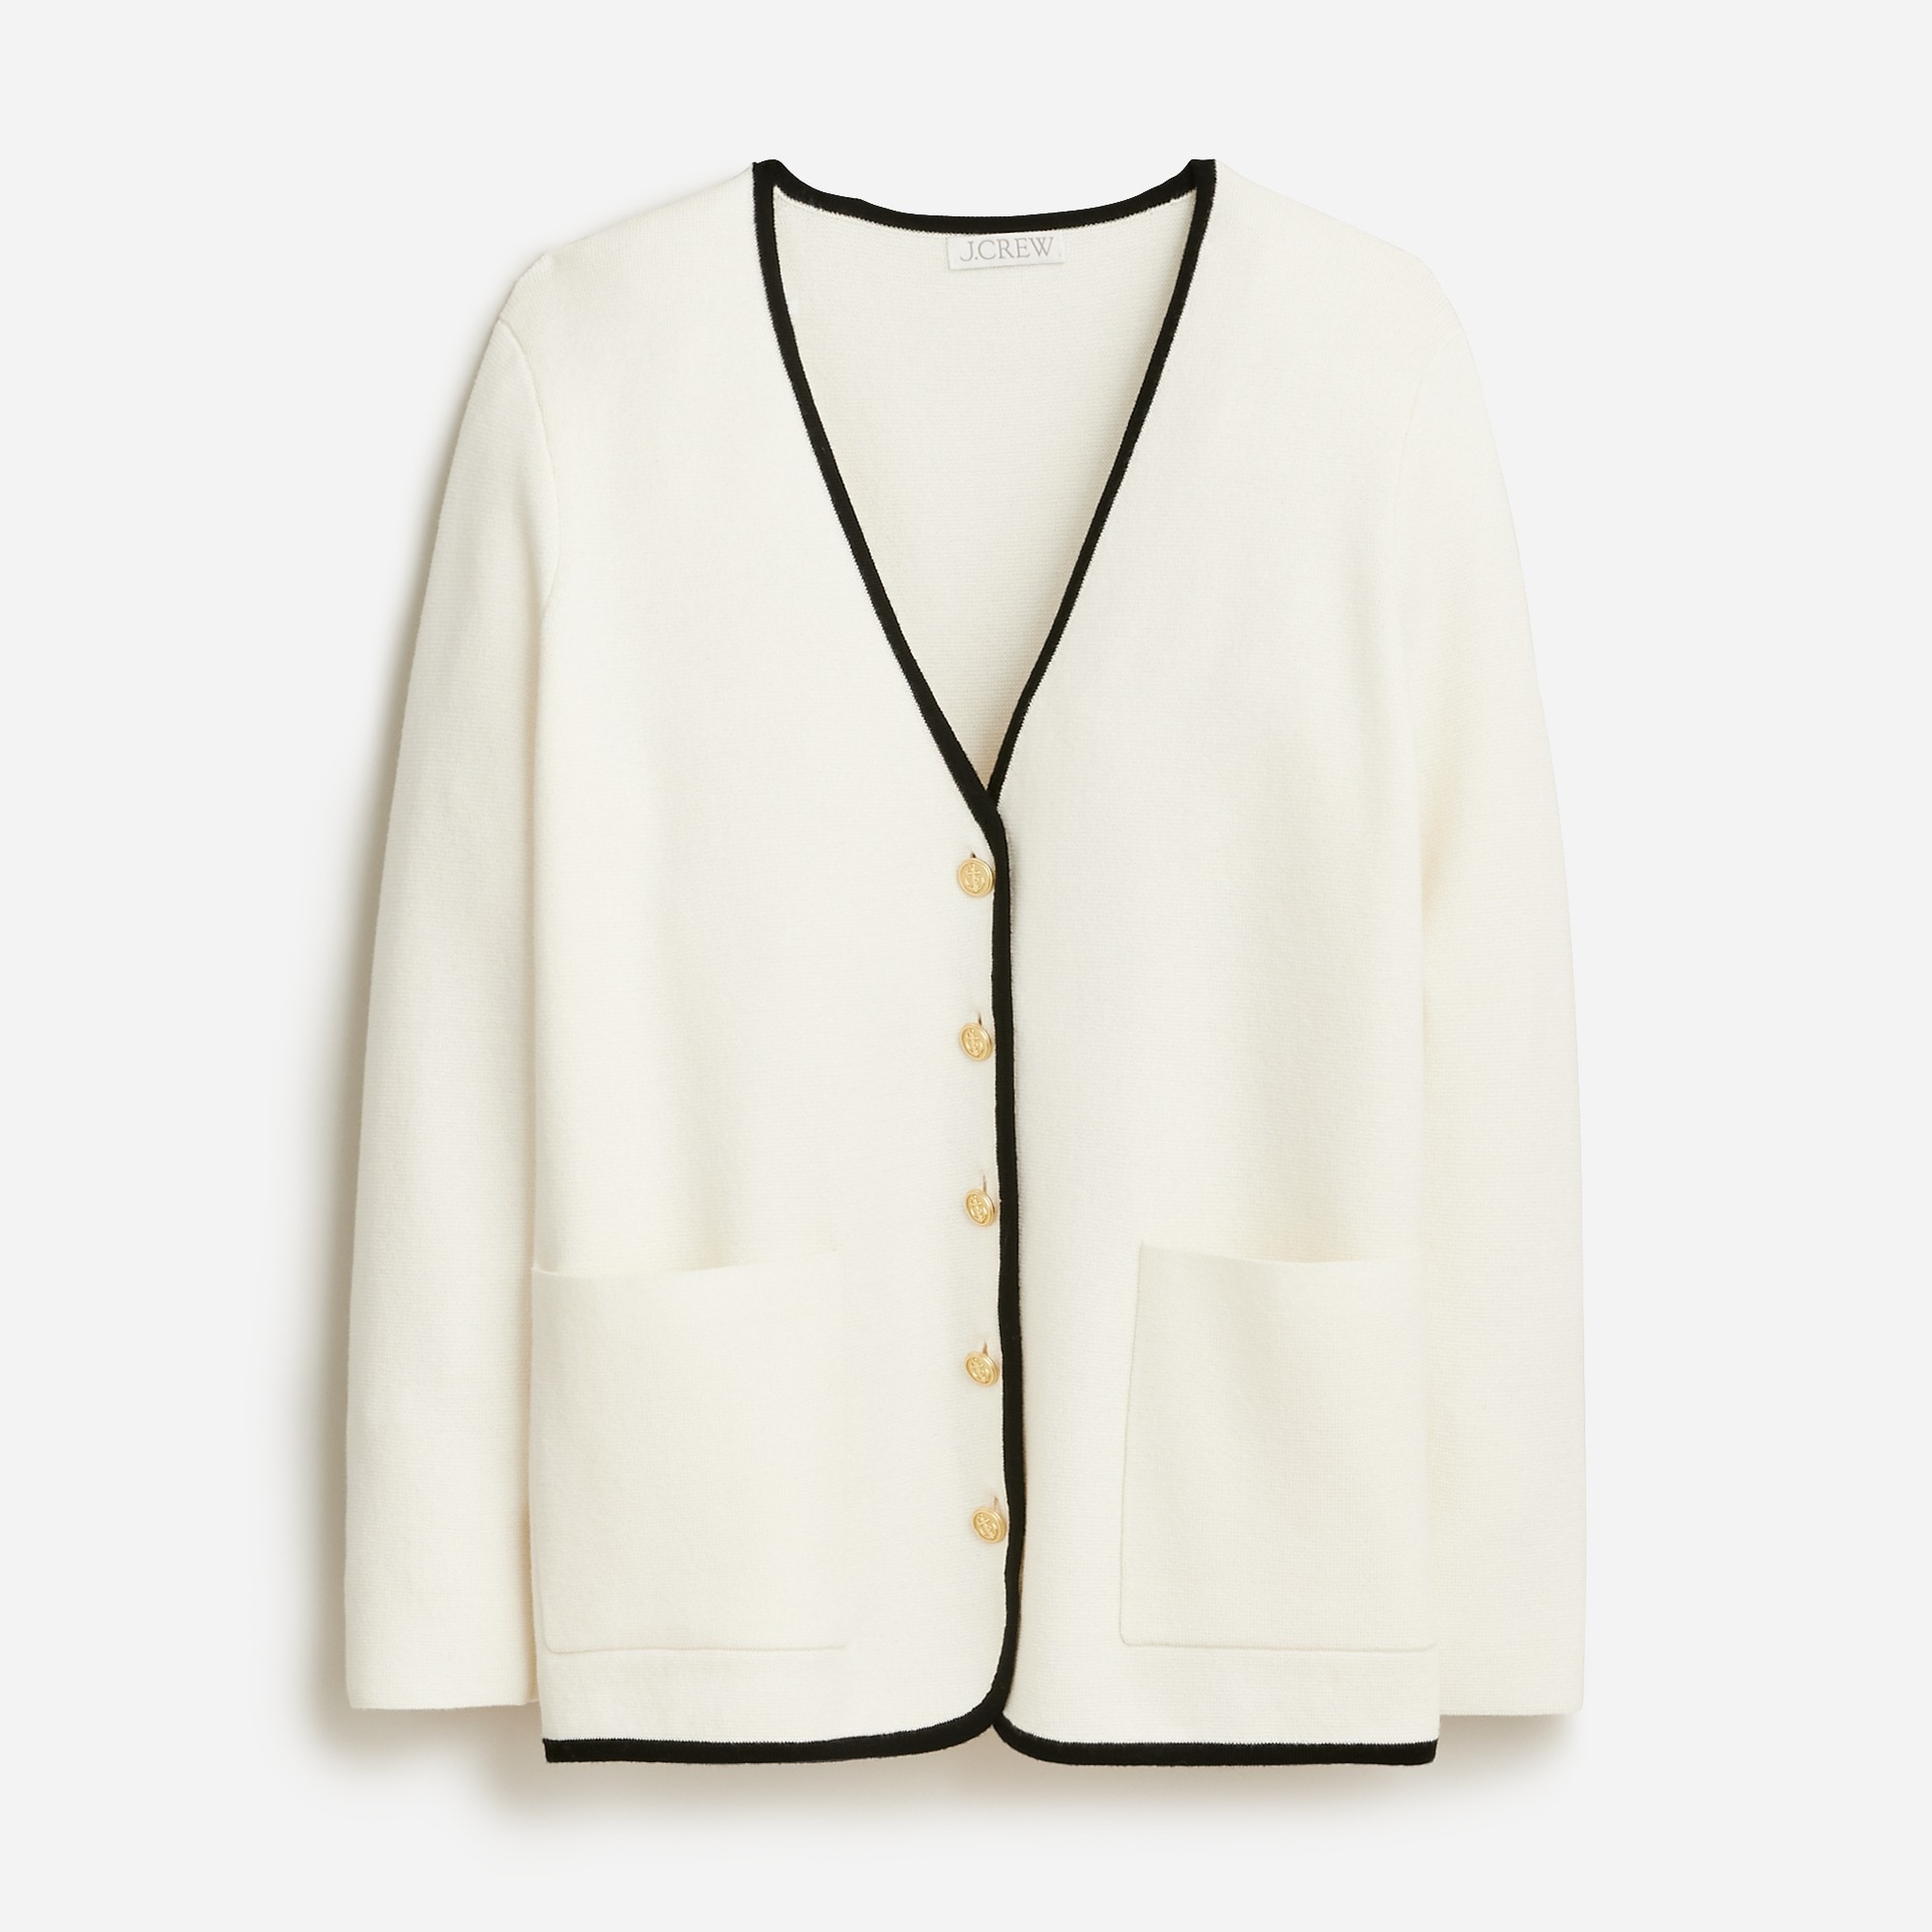  Giselle V-neck sweater blazer with contrast trim